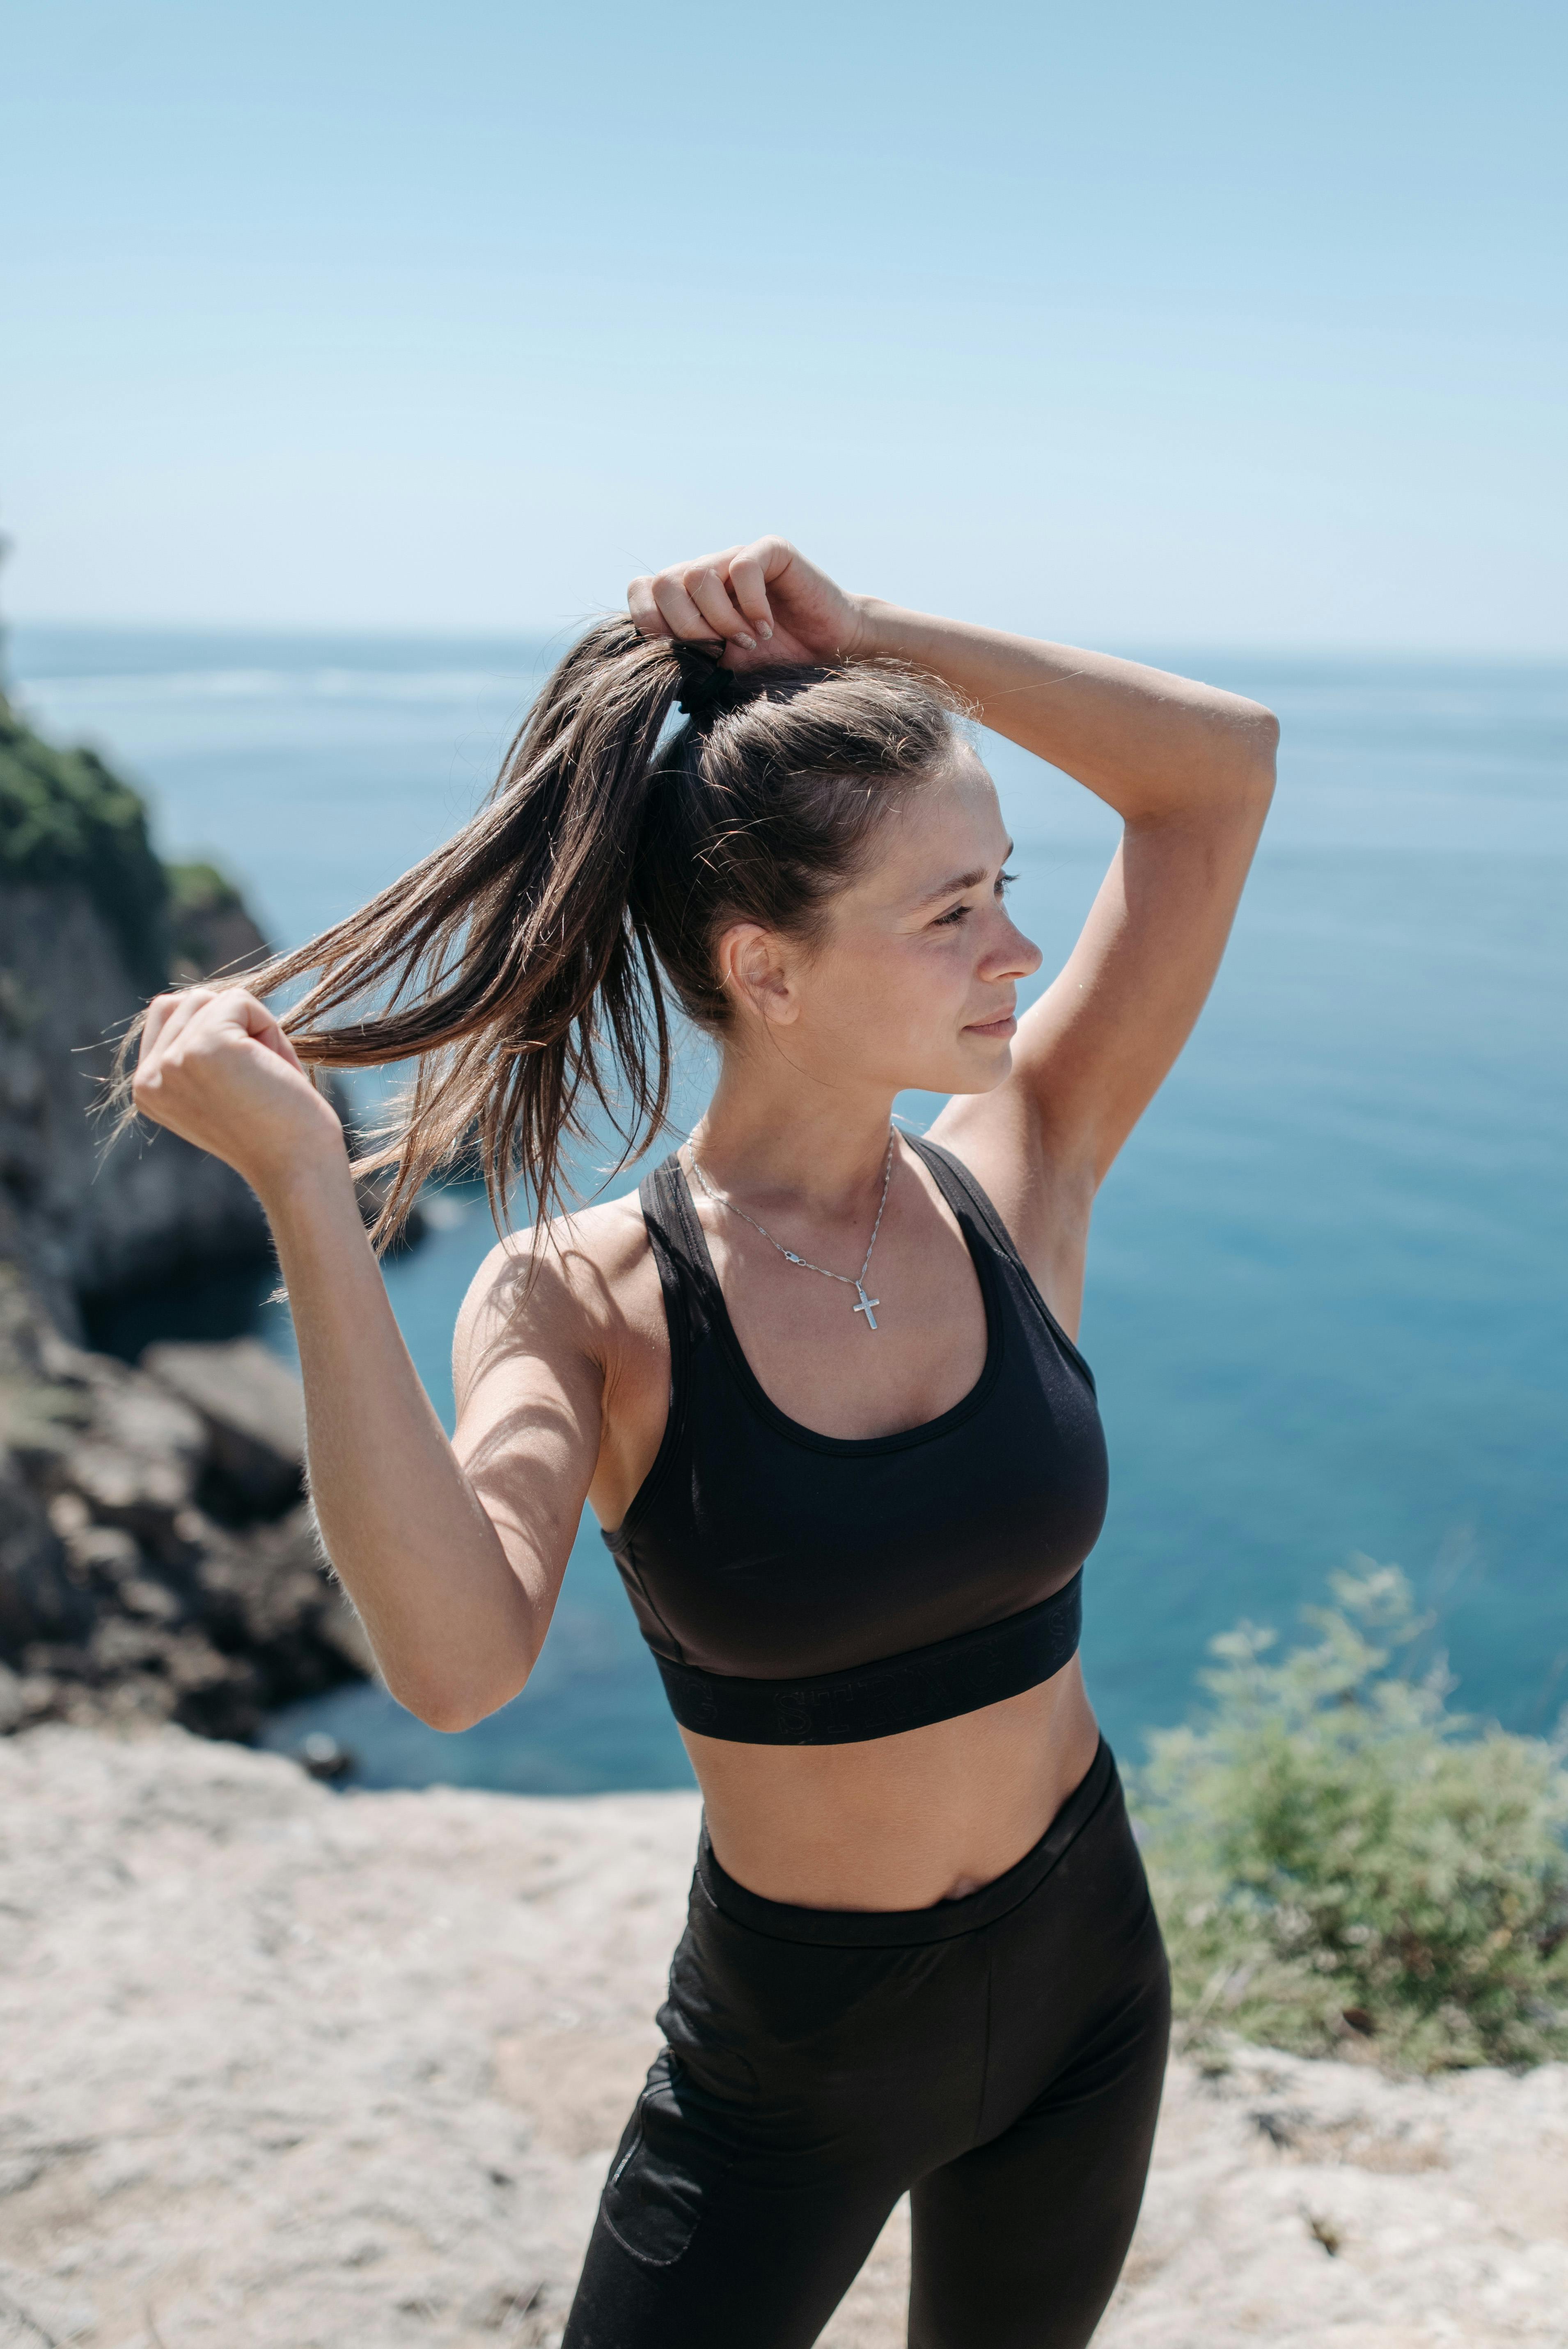 A Beautiful Woman in Black Sports Bra Holding Her Hair · Free